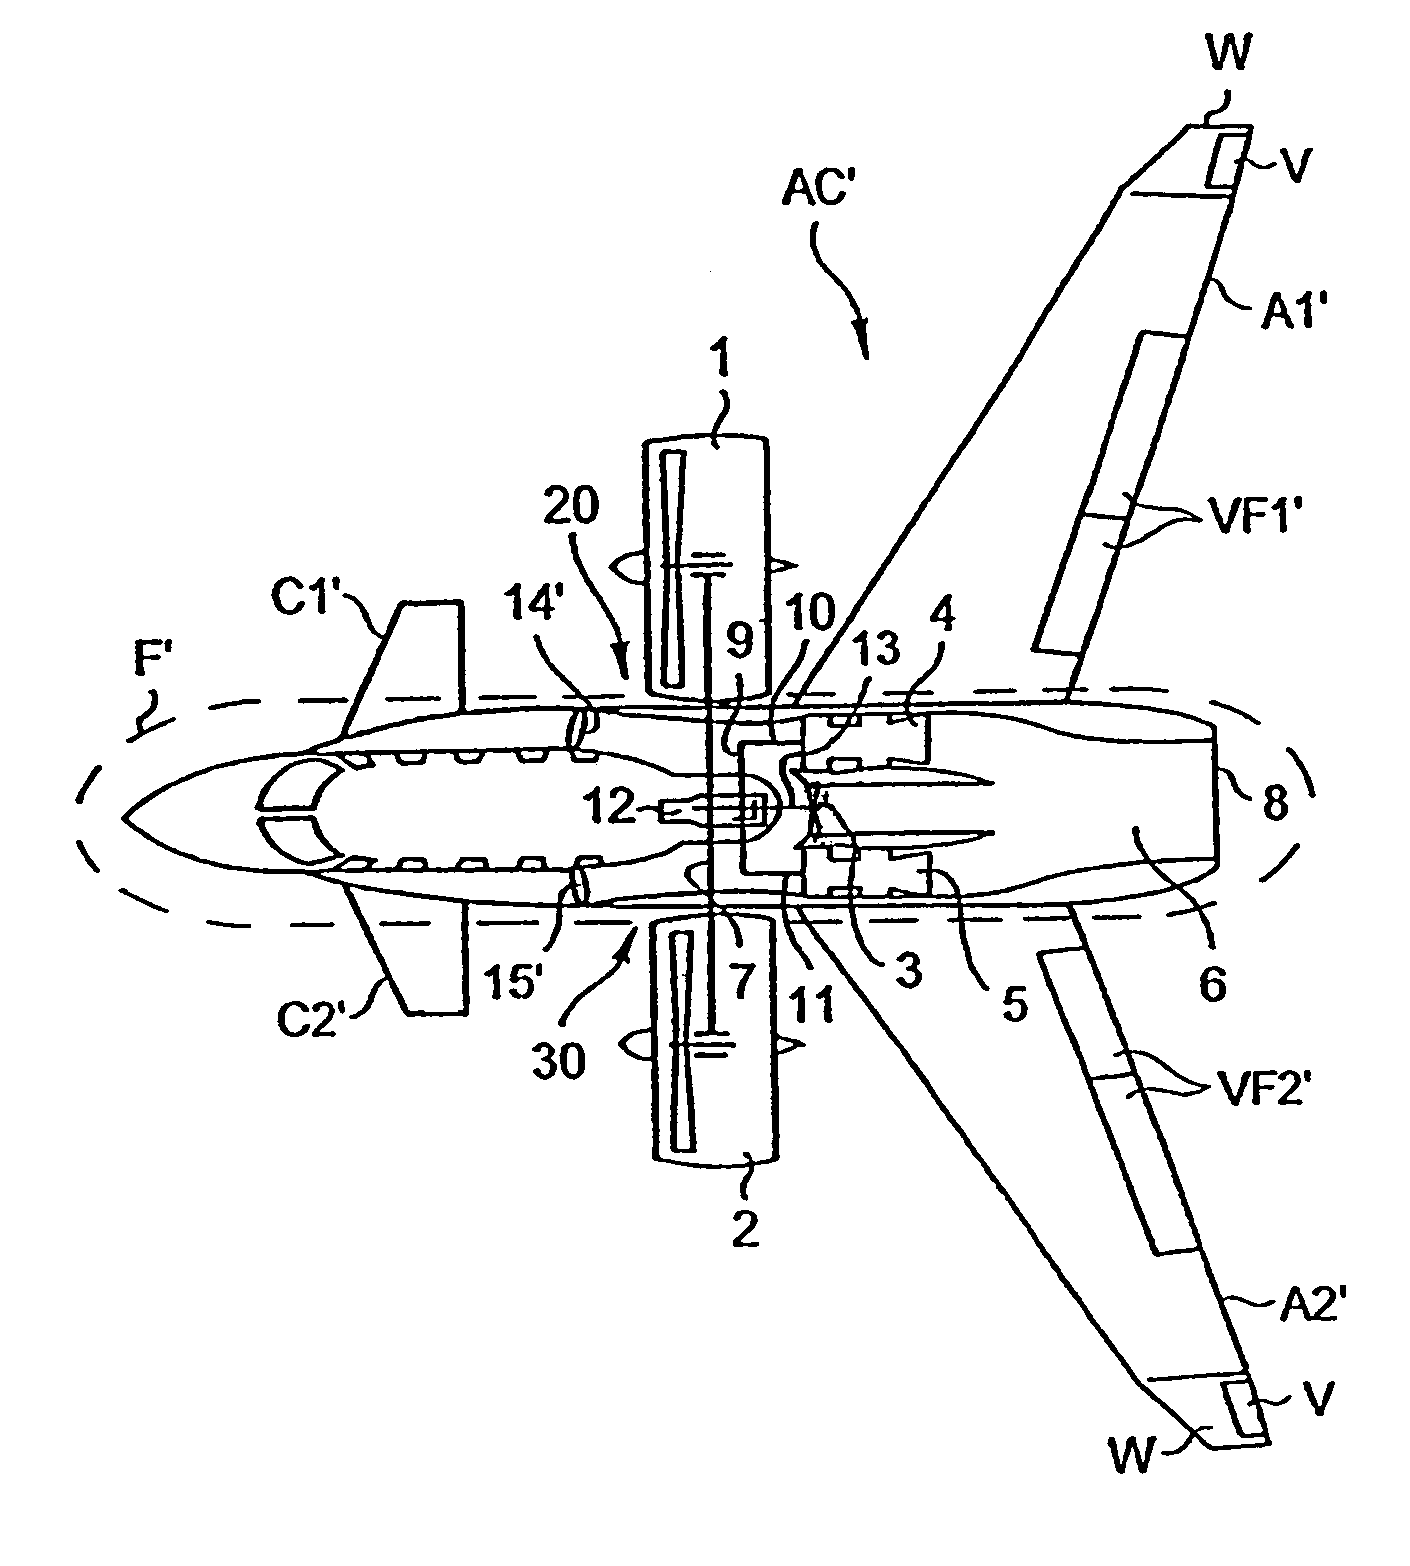 Convertible aircraft provided with two tilt fans on either side of the fuselage, and with a non-tilting fan inserted in the fuselage